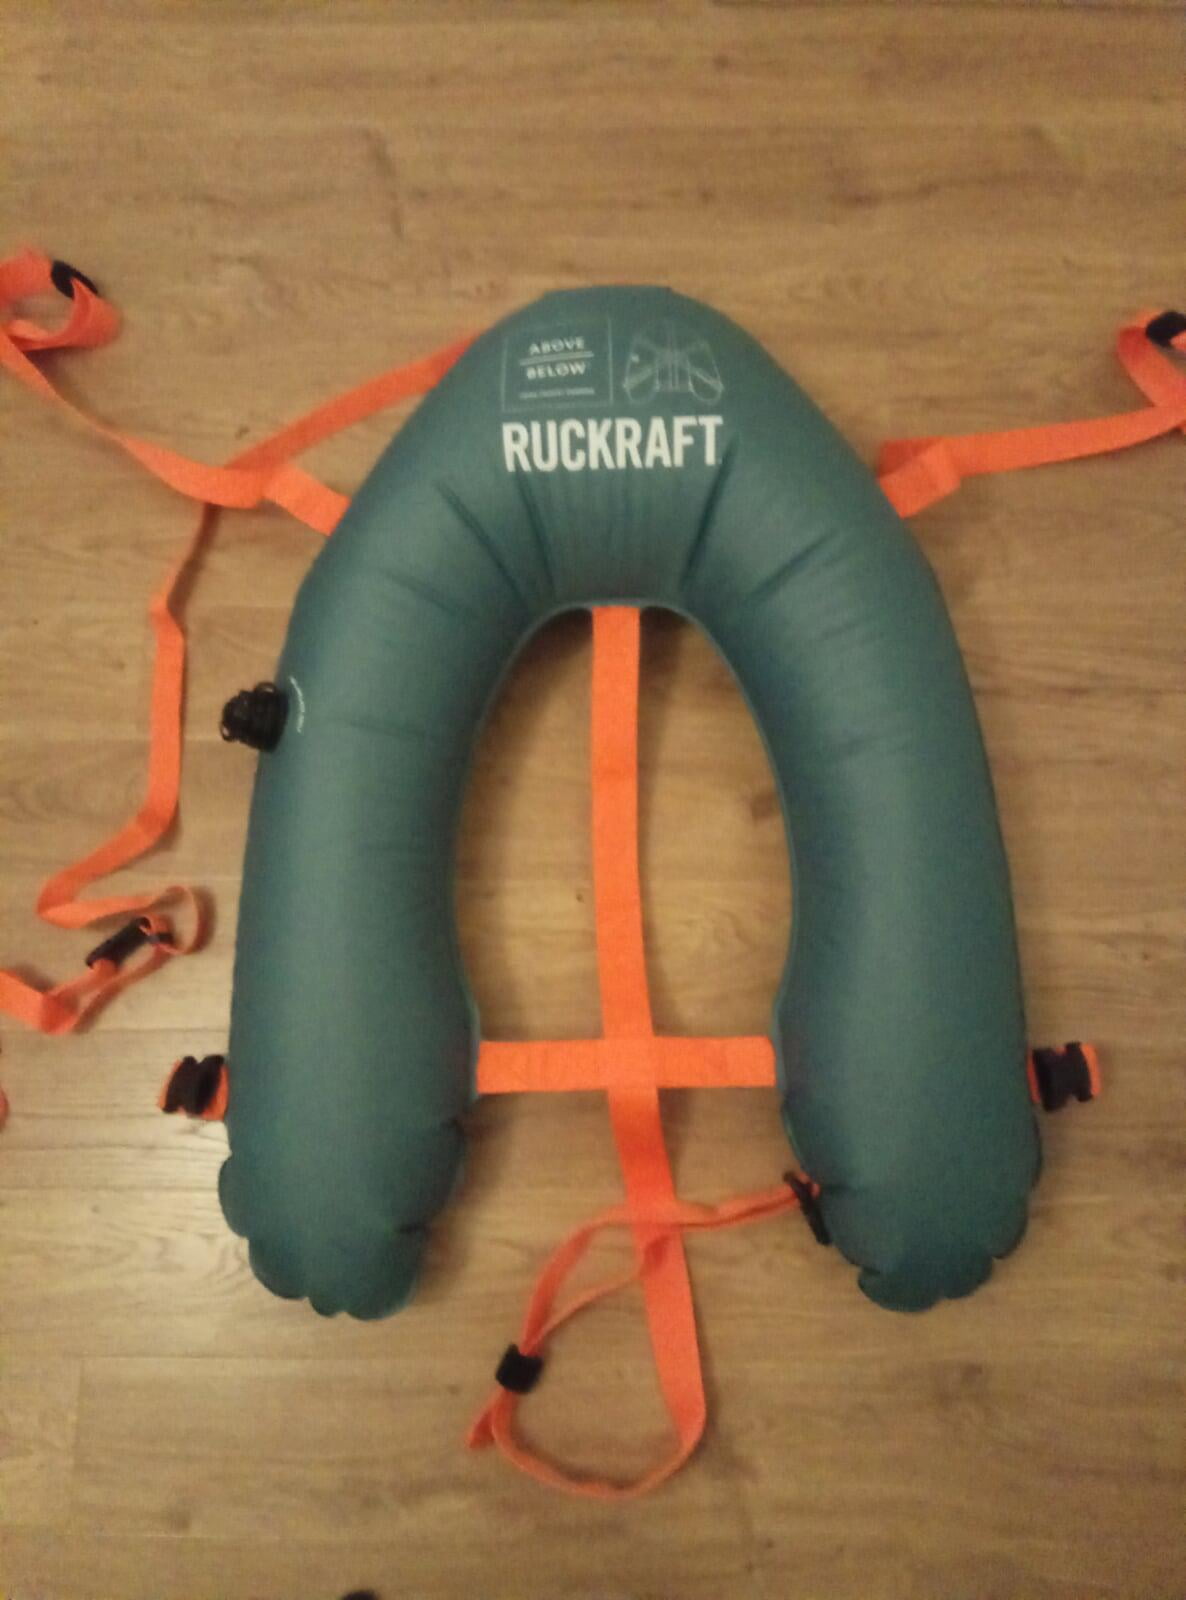 The RuckRaft is a swim trekking tow float from Above Below